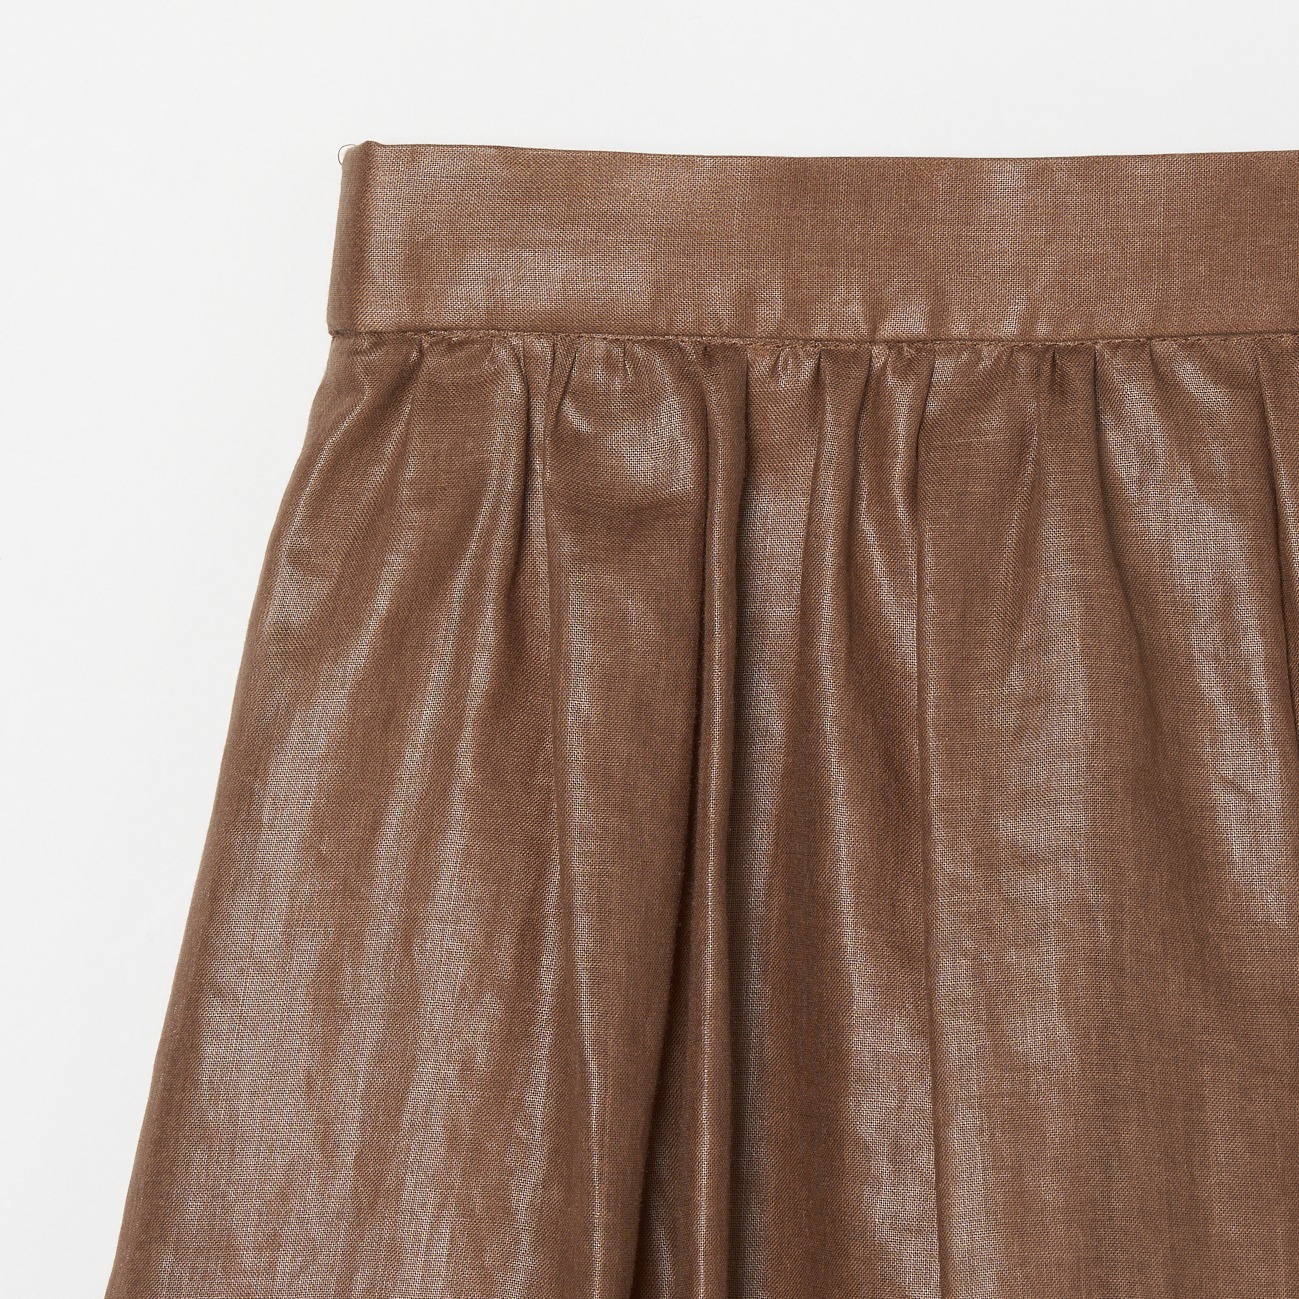 LEATHER BOIL GATHER SKIRT 詳細画像 ダークブラウン 3